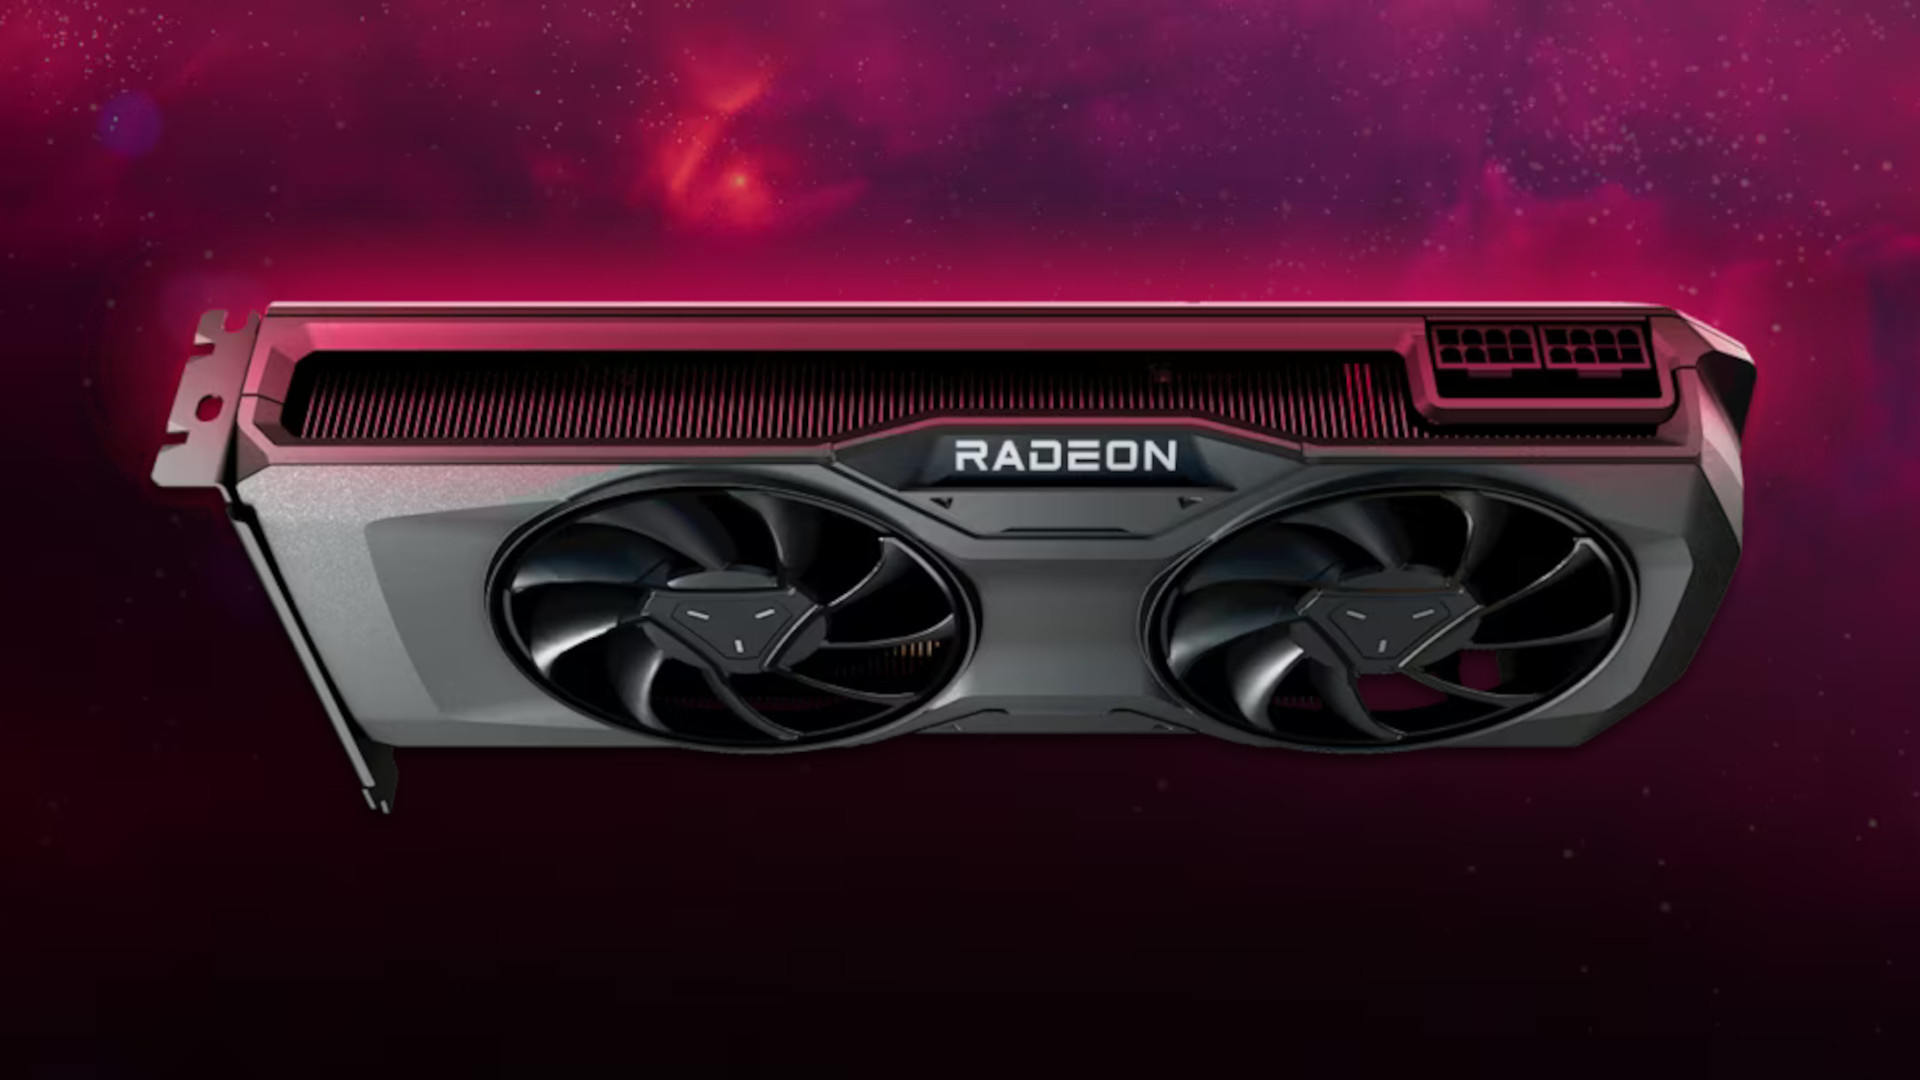 AMD Radeon RX 7700 XT RDNA 3 Navi 32 Graphics Card Specs, Performance,  Price & Availability – Everything We Know So Far - Wccftech